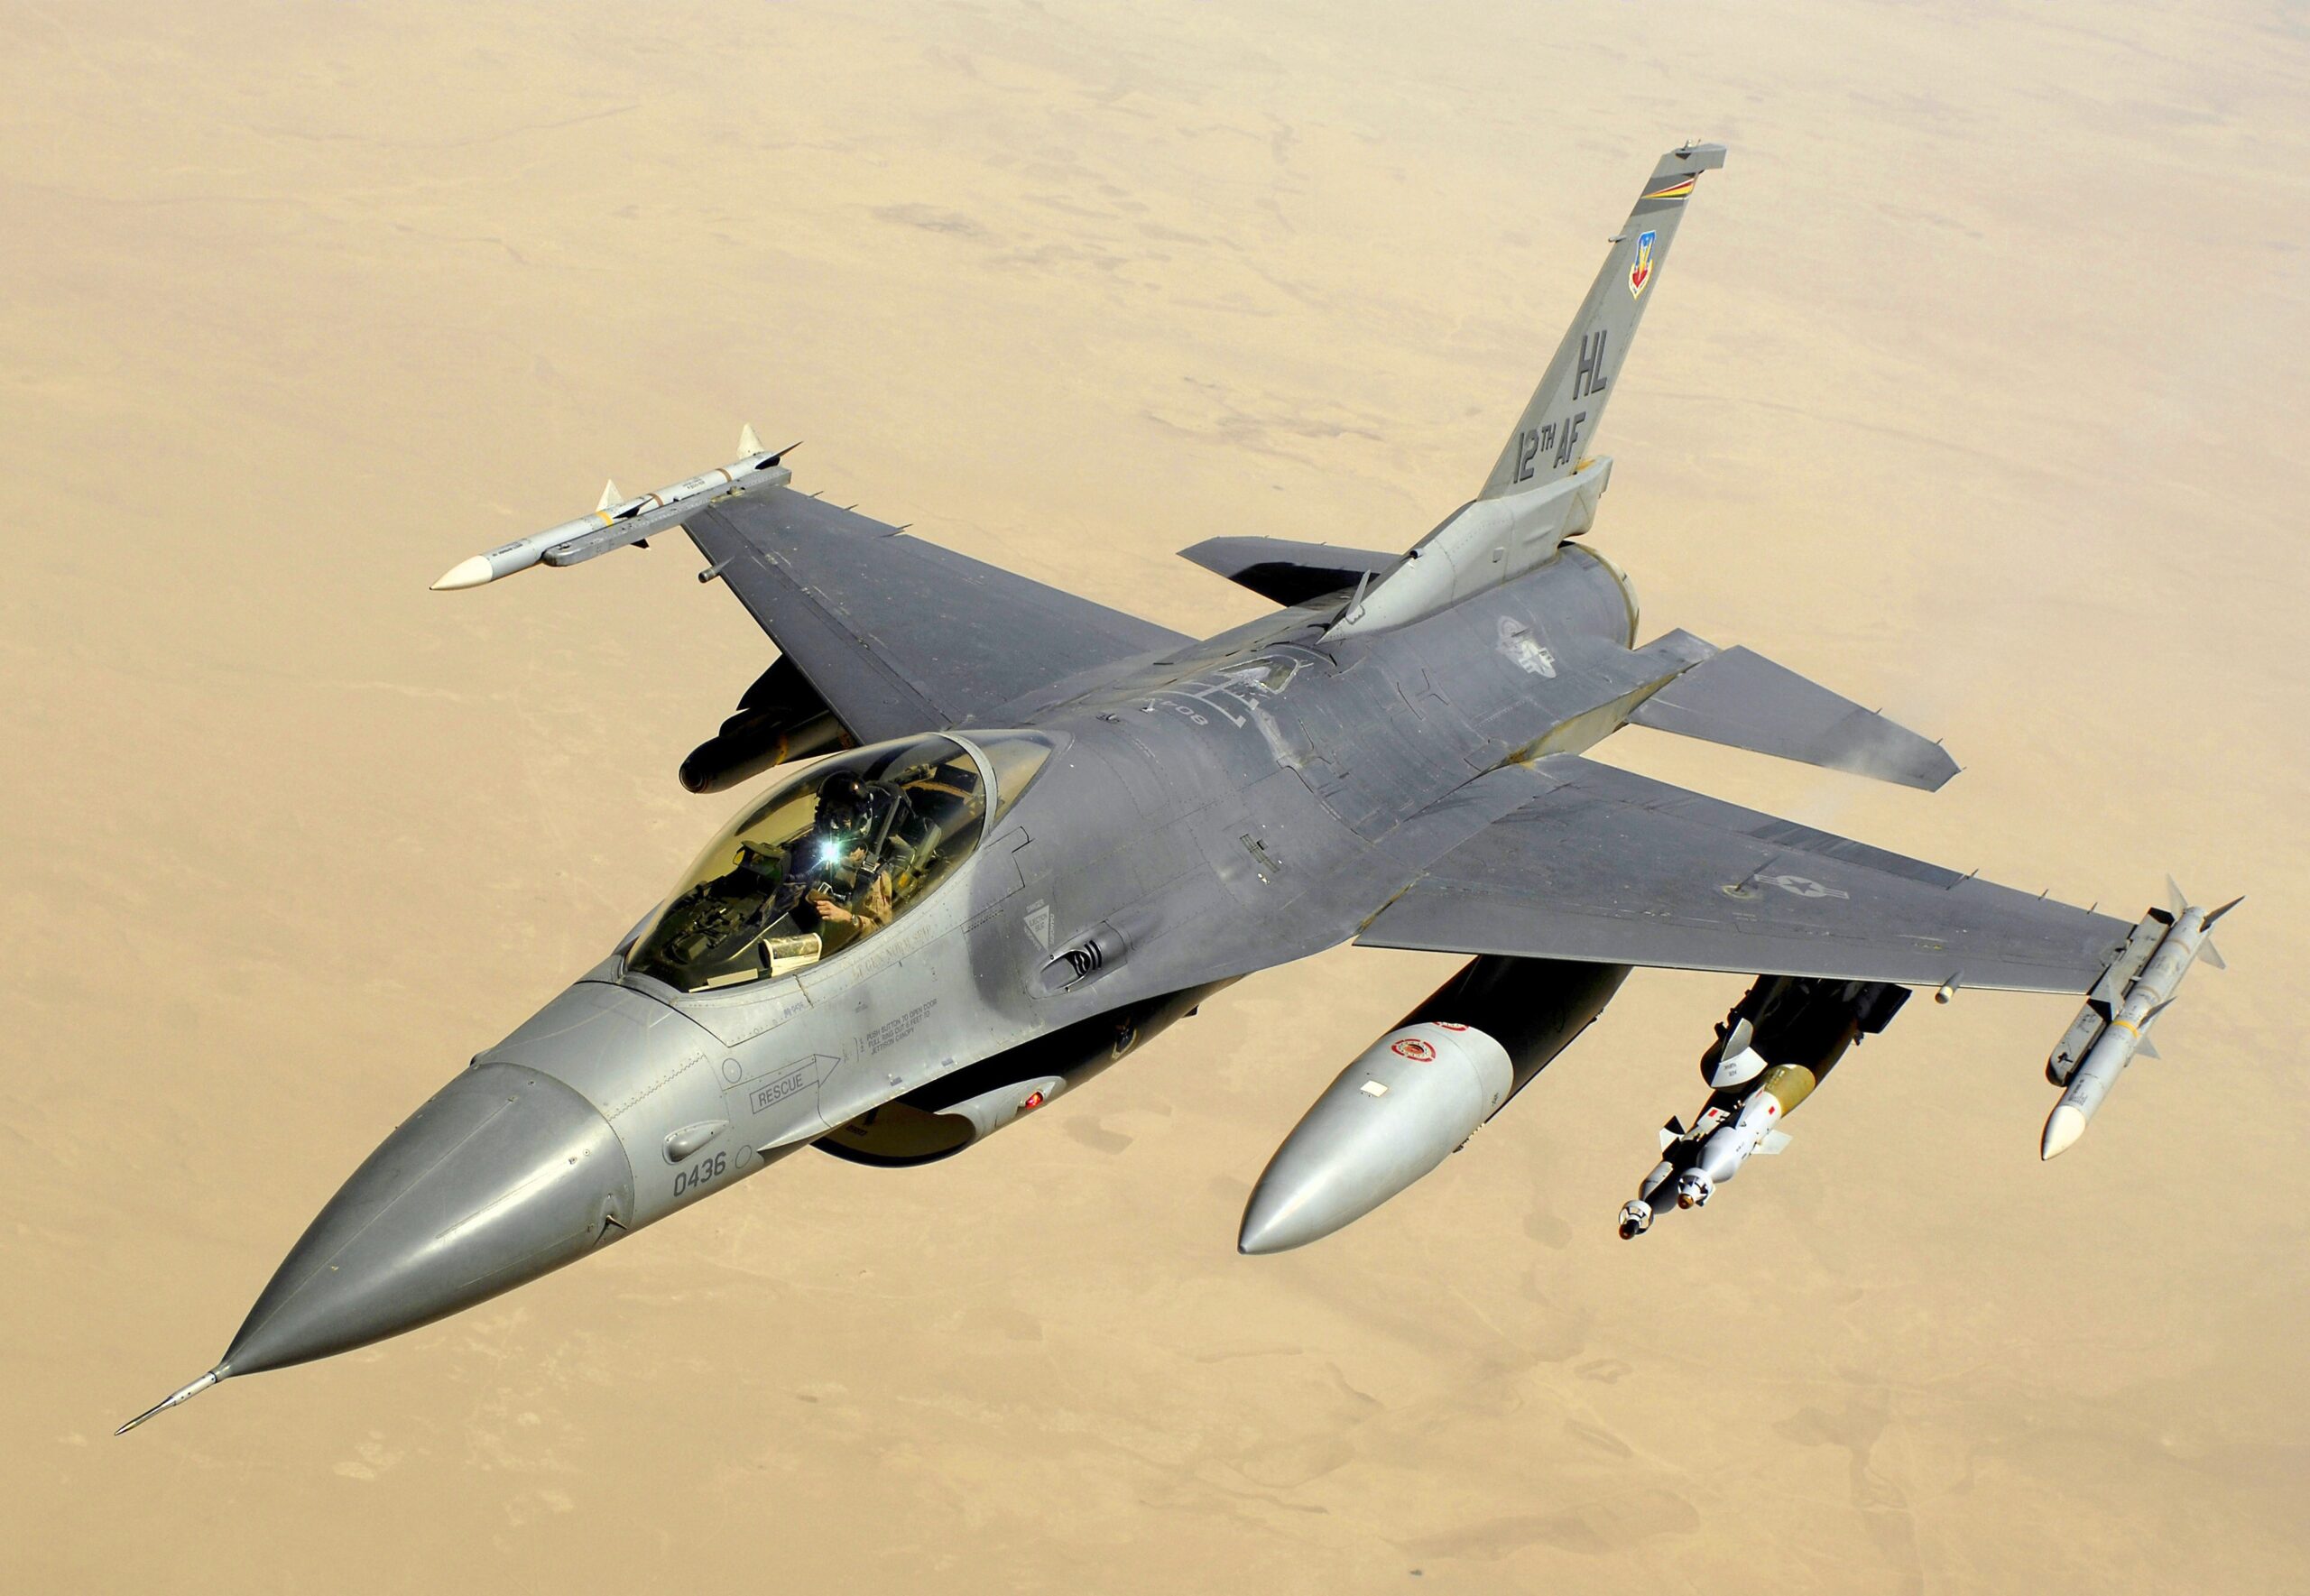 An F-16C flying through the air above the desert.